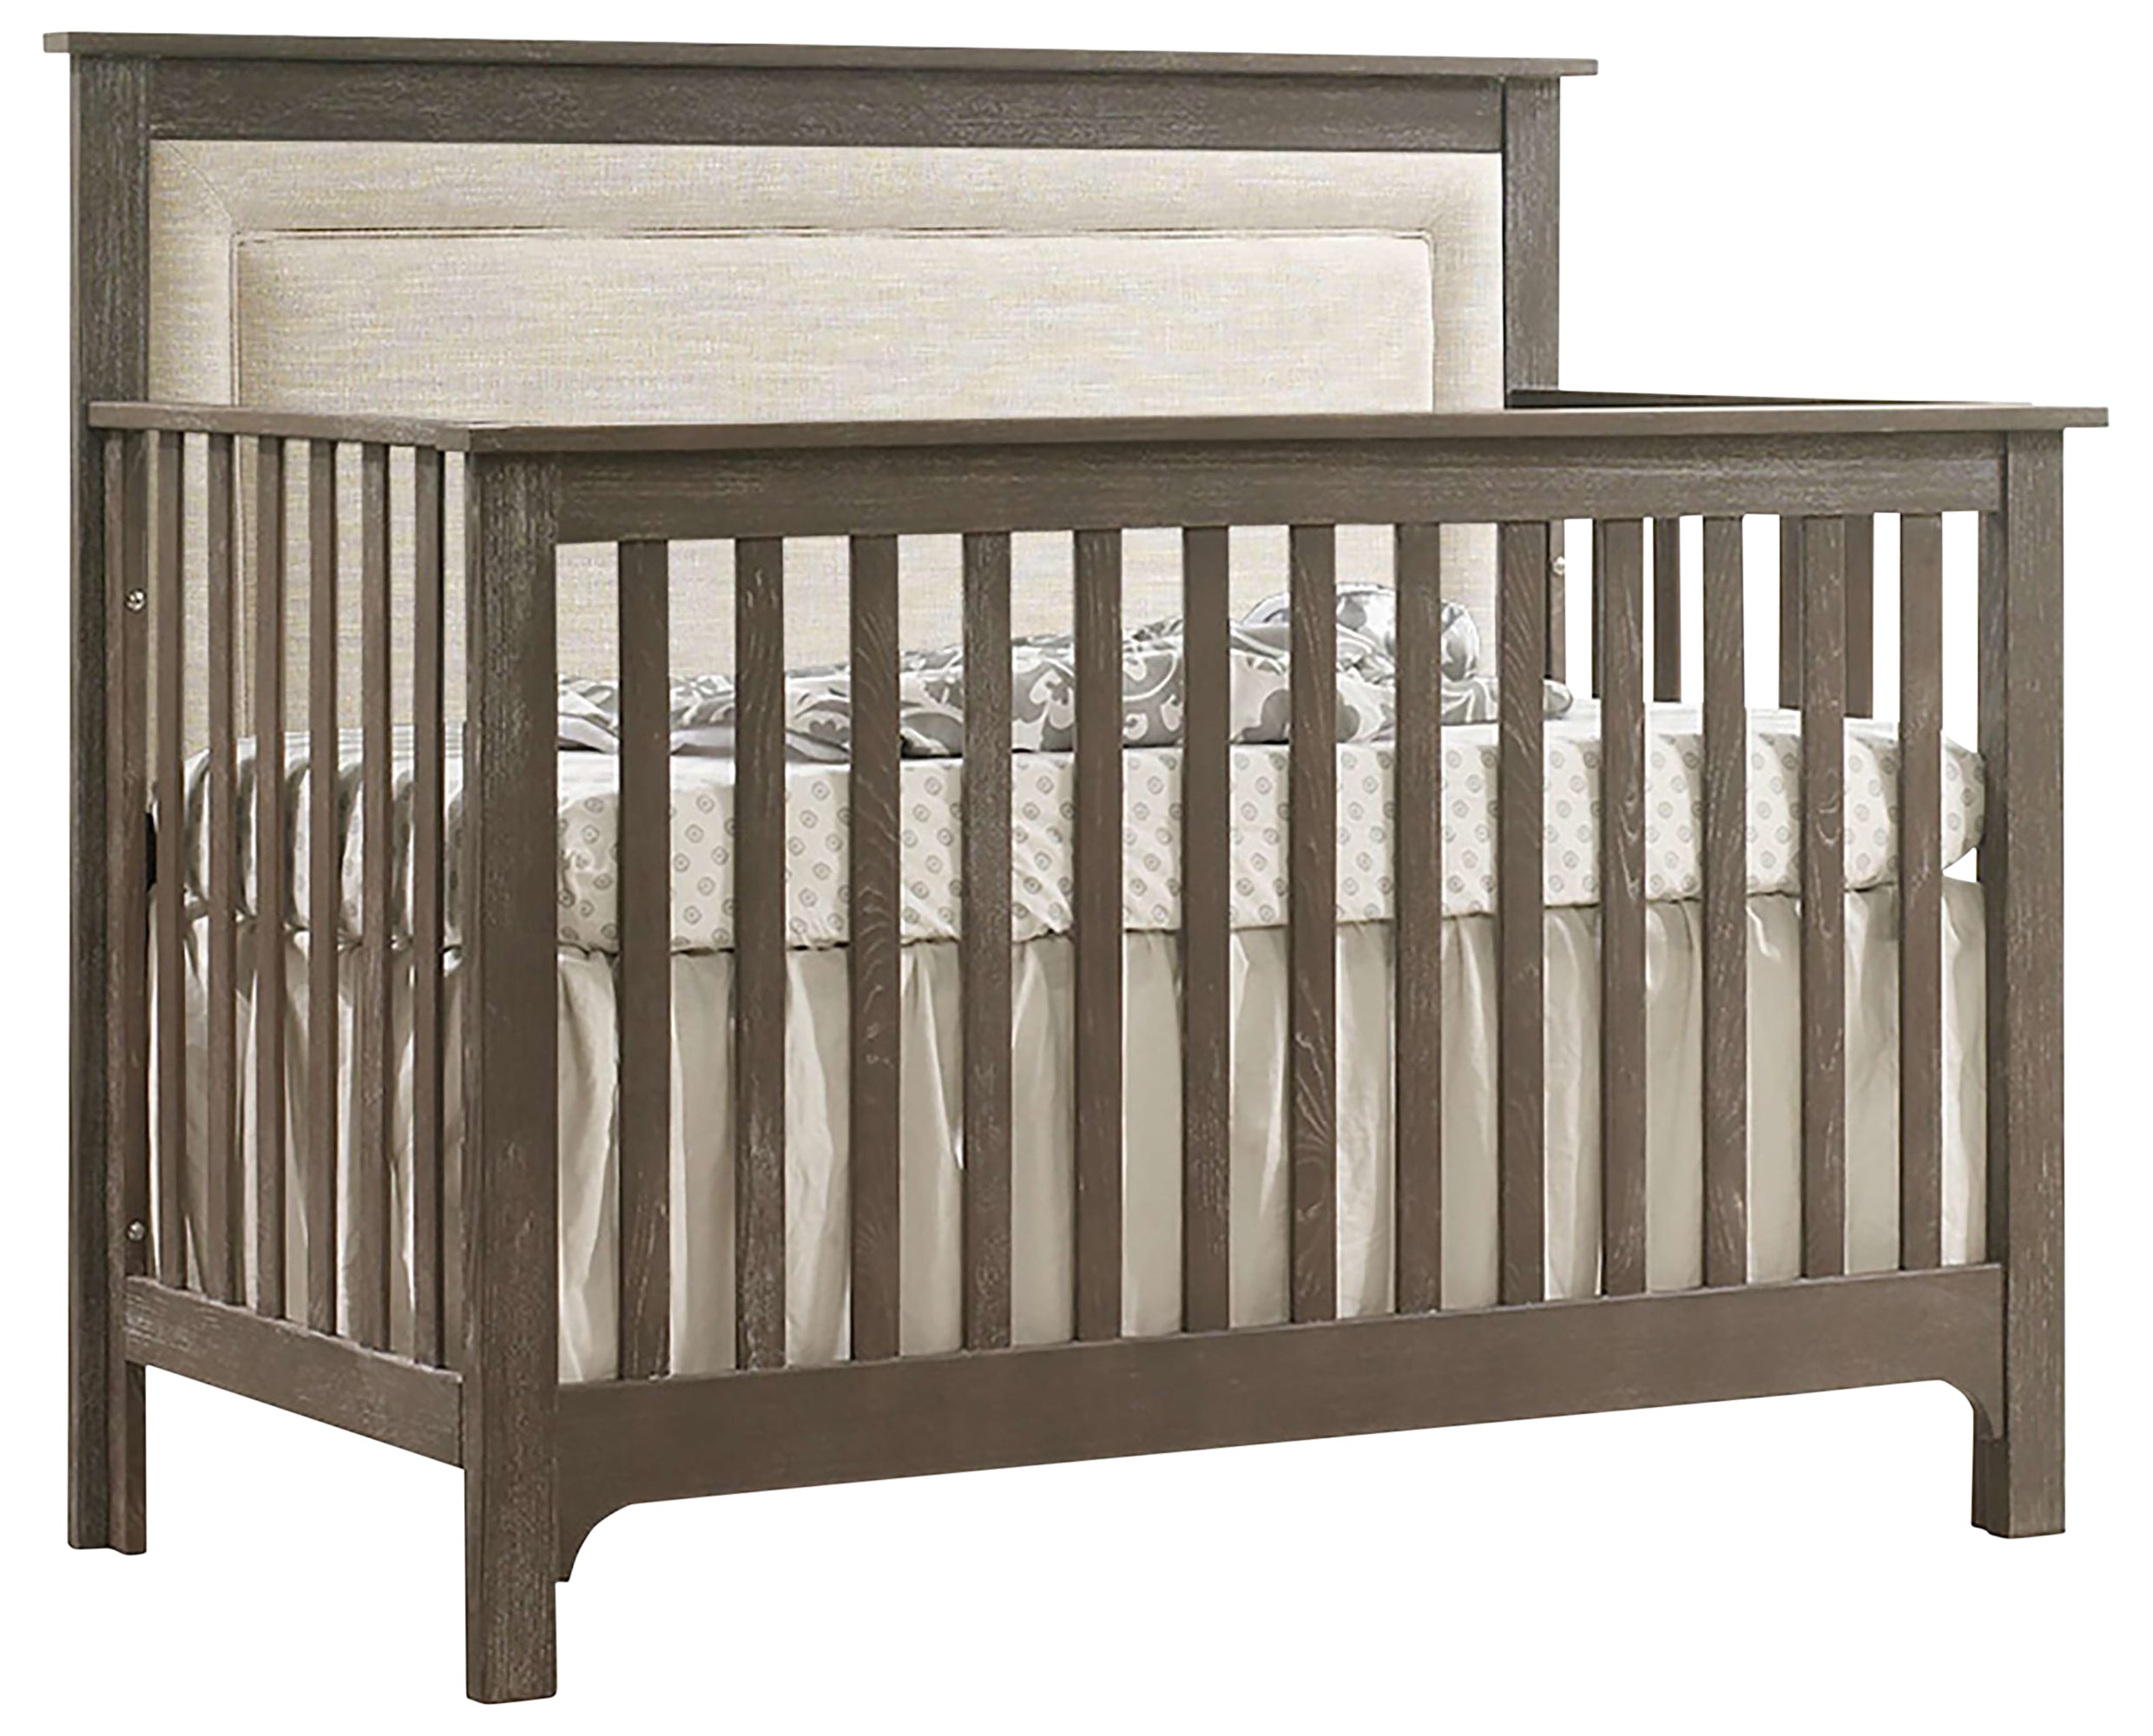 Sugar Cane Brushed Oak with Talc Fabric | Emerson 5-in-1 Convertible Crib w/Talc Upholstered Headboard Panel | Valley Ridge Furniture